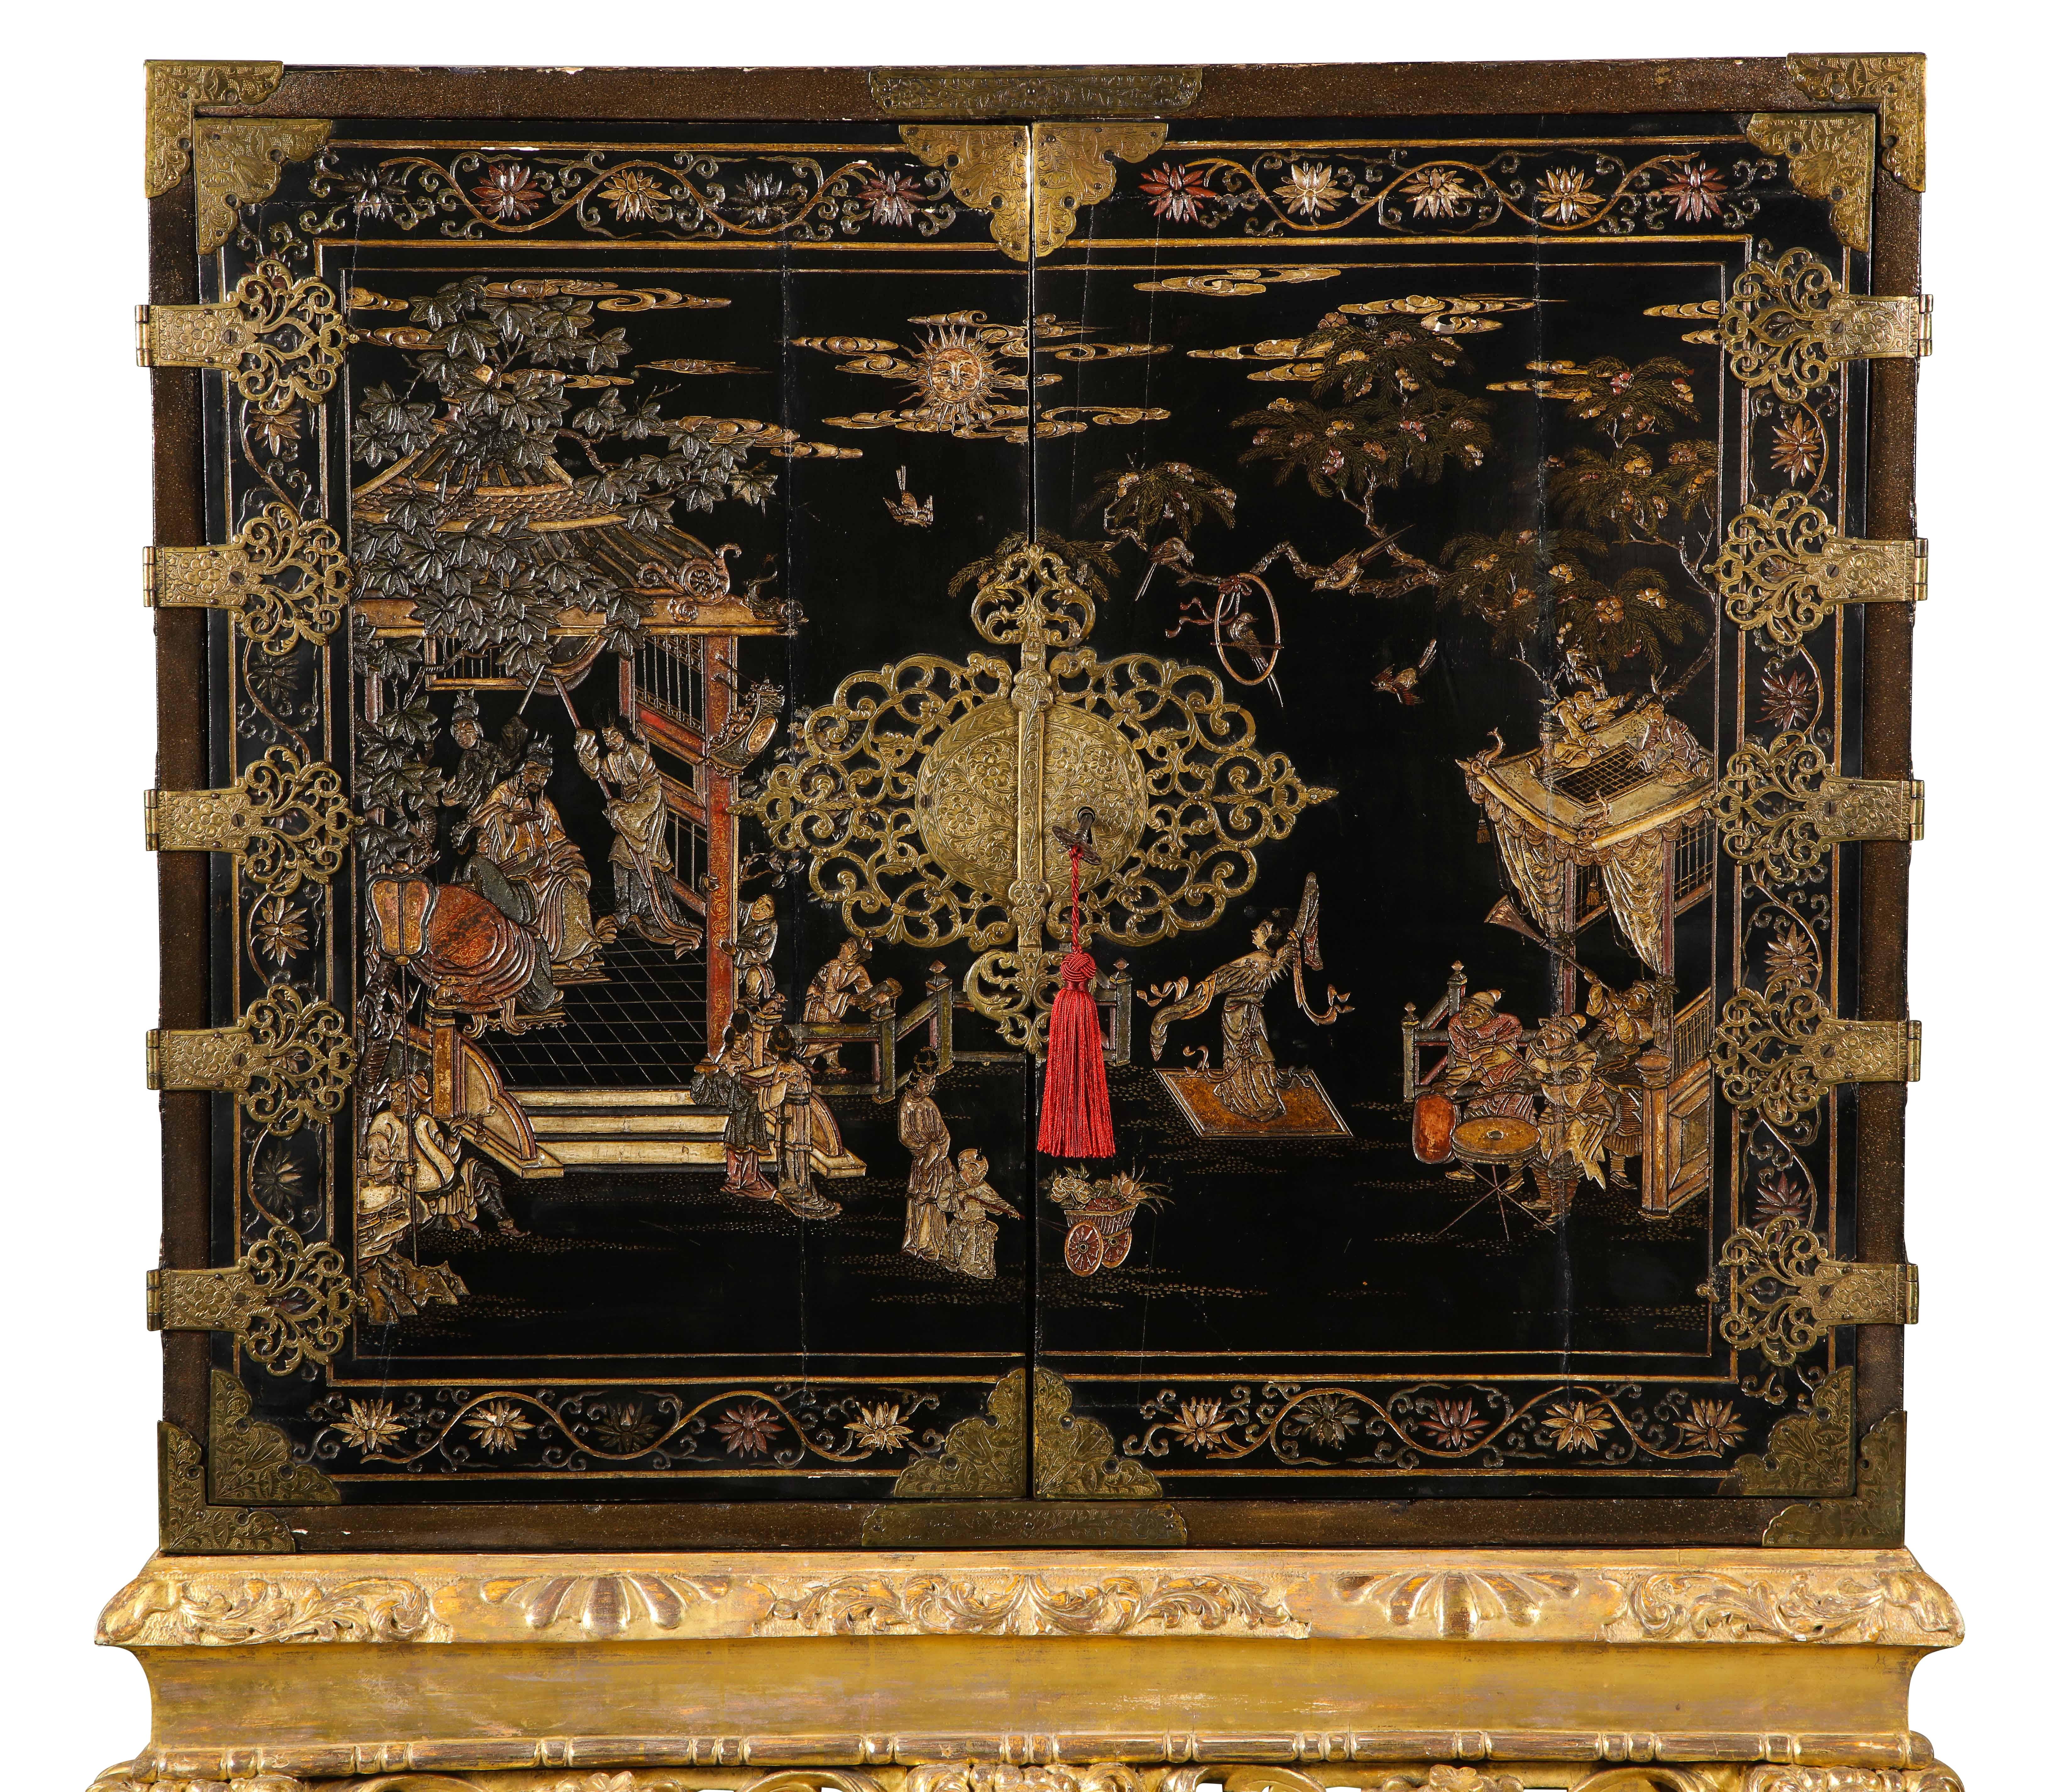 The cabinet doors decorated with court scenes with pierced foliate hinges & lock plates enclosing eleven drawers decorated with different scenes, all on a giltwood stand.
Provenance: The 2nd viscount Camrose, Hackwood Park, Basingstoke,